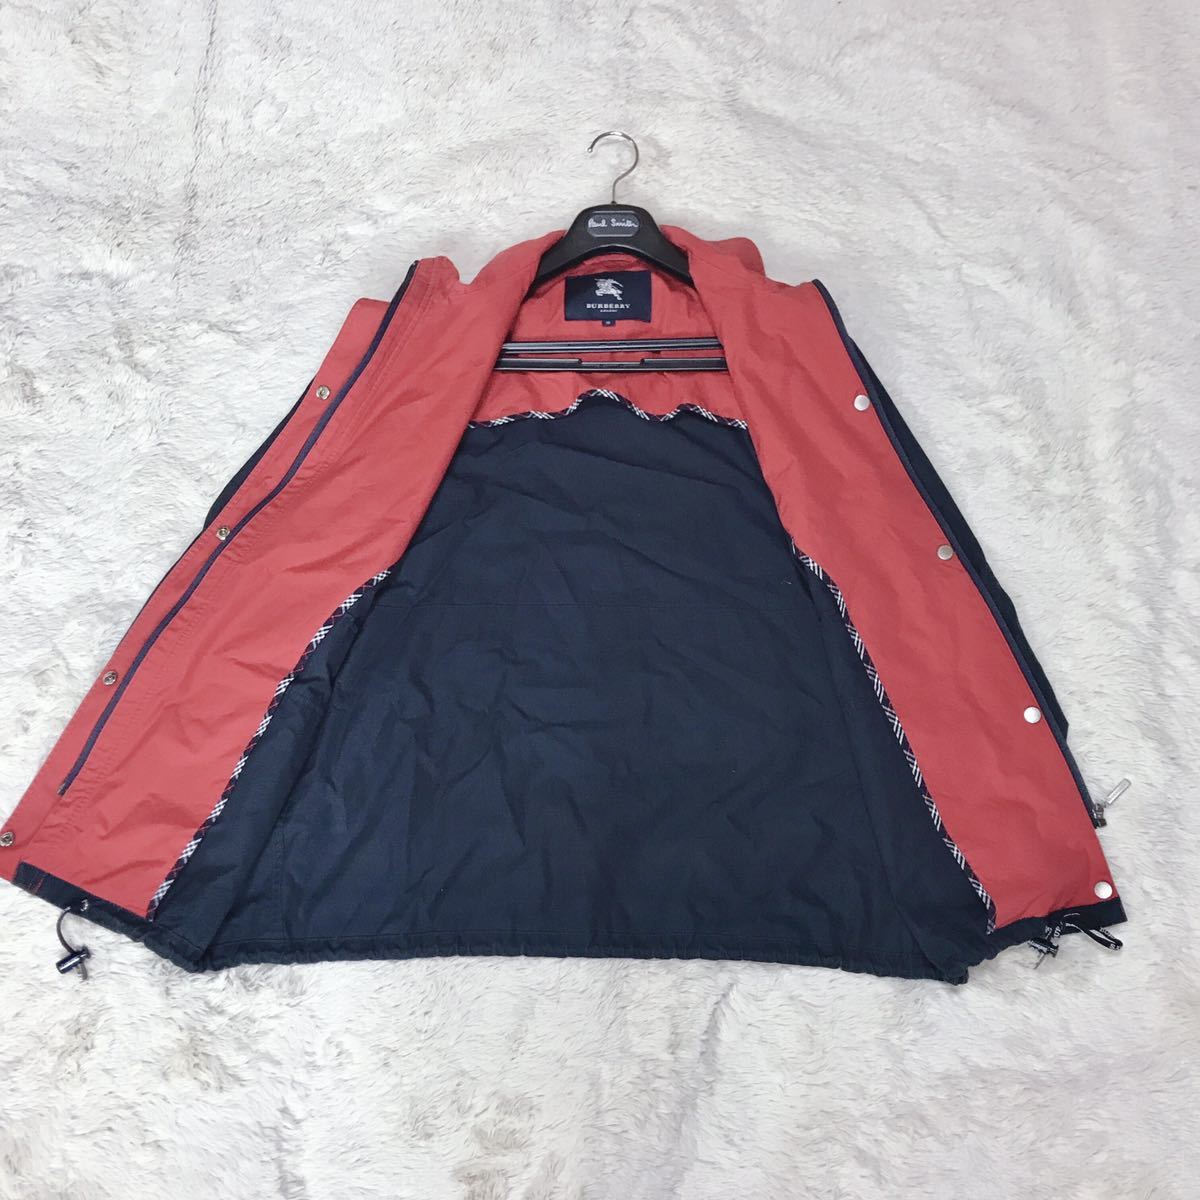  large size beautiful goods BURBERRY swing top blouson jacket Burberry XL size brand Logo silver button navy red 